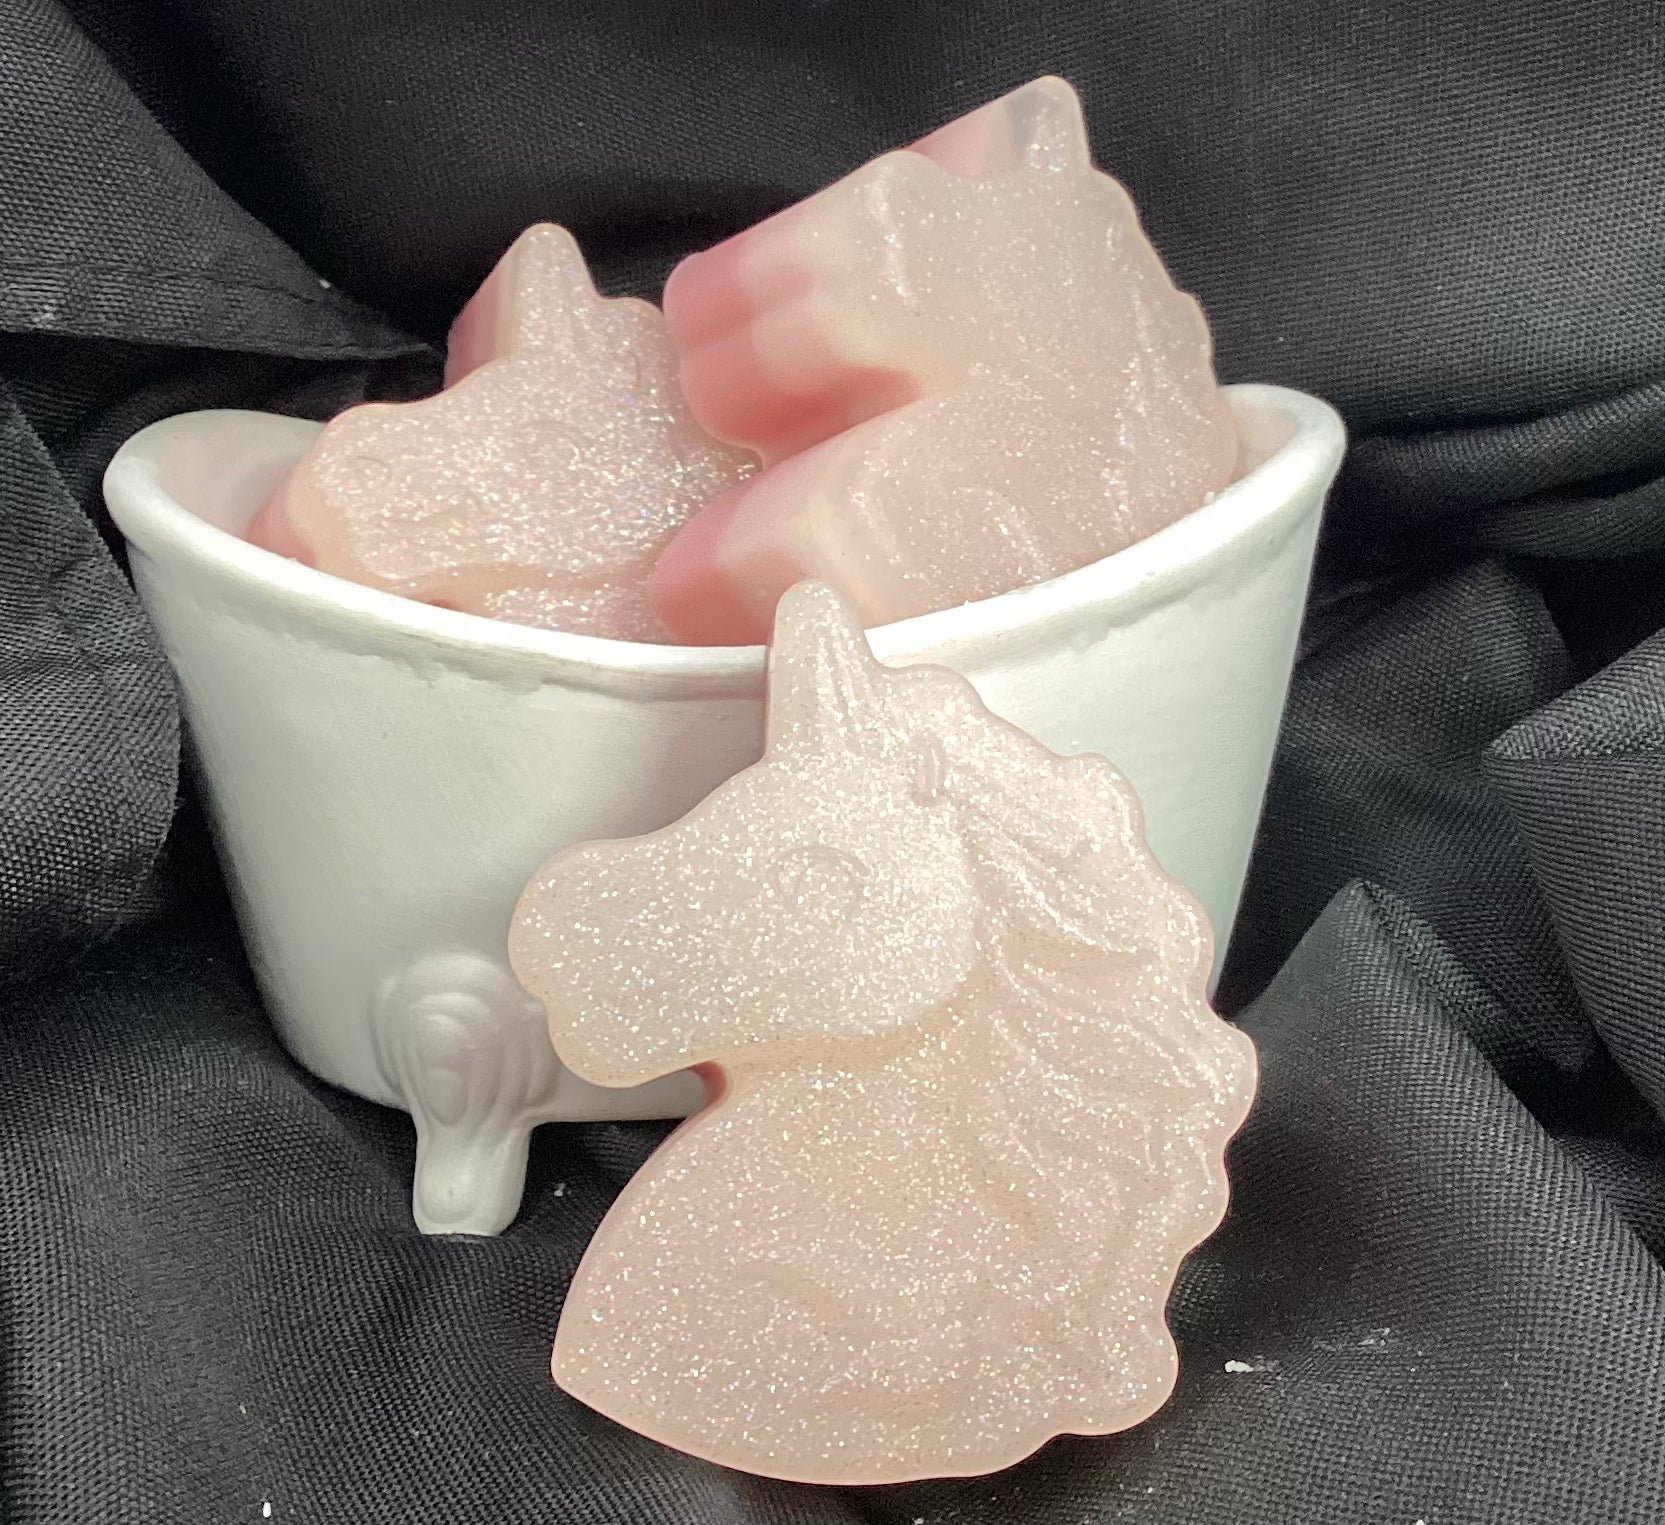 What little girl doesn't love rainbows, glitter, bubble gum, and unicorns?  This soap has it all!

This is a unicorn-shaped bar of shea butter and glycerin soap with glitter!  It even glows in the dark!   The scent is Bubble Gum.  A bar fit for your princess.

These would make a wonderful favor for a Birthday party or Baby shower.